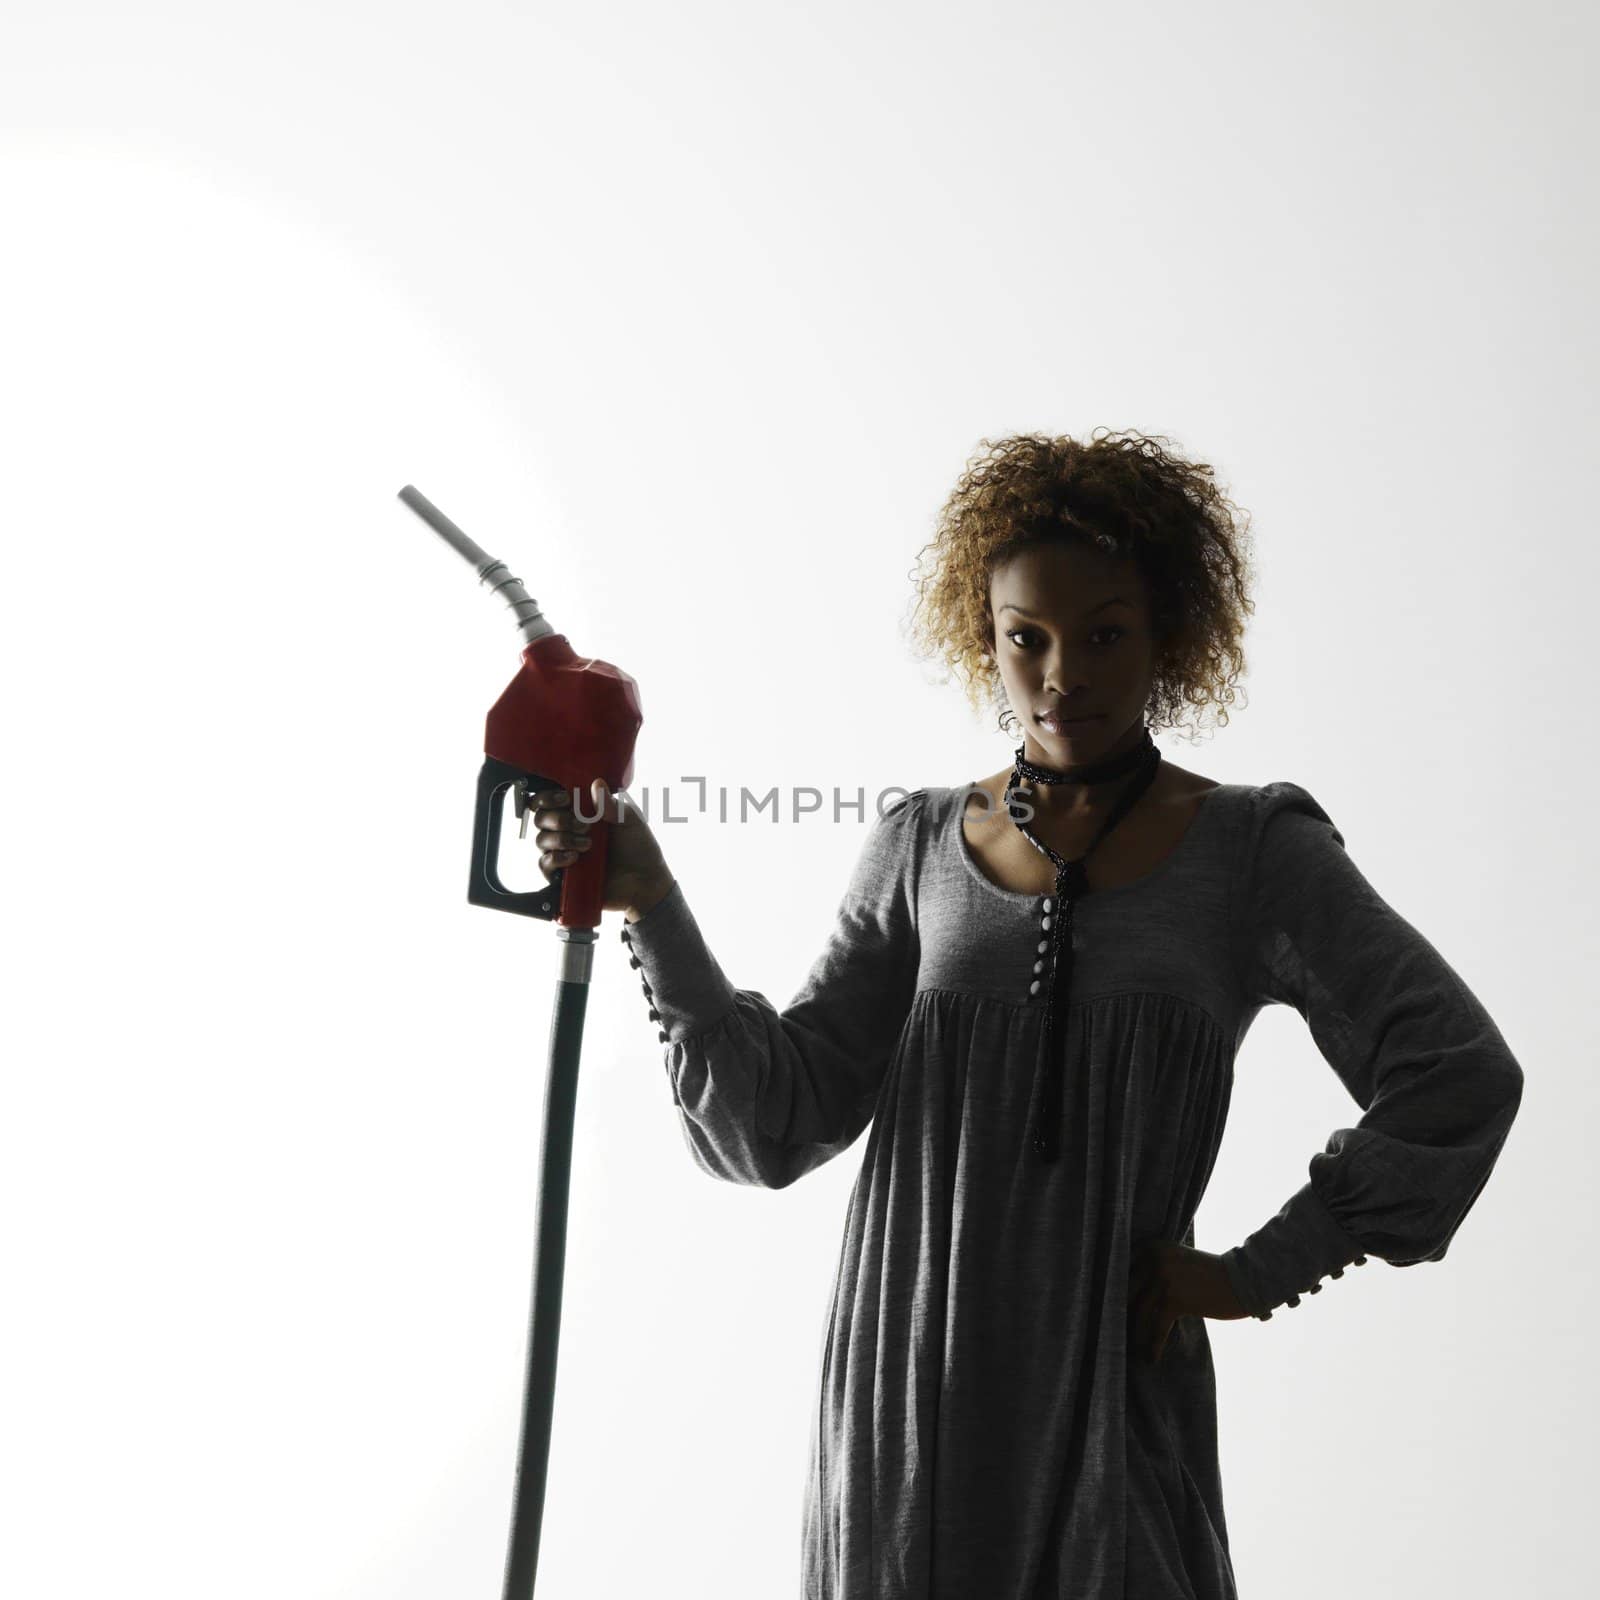 Woman holding gasoline pump nozzle against white background with dramatic studio lighting.